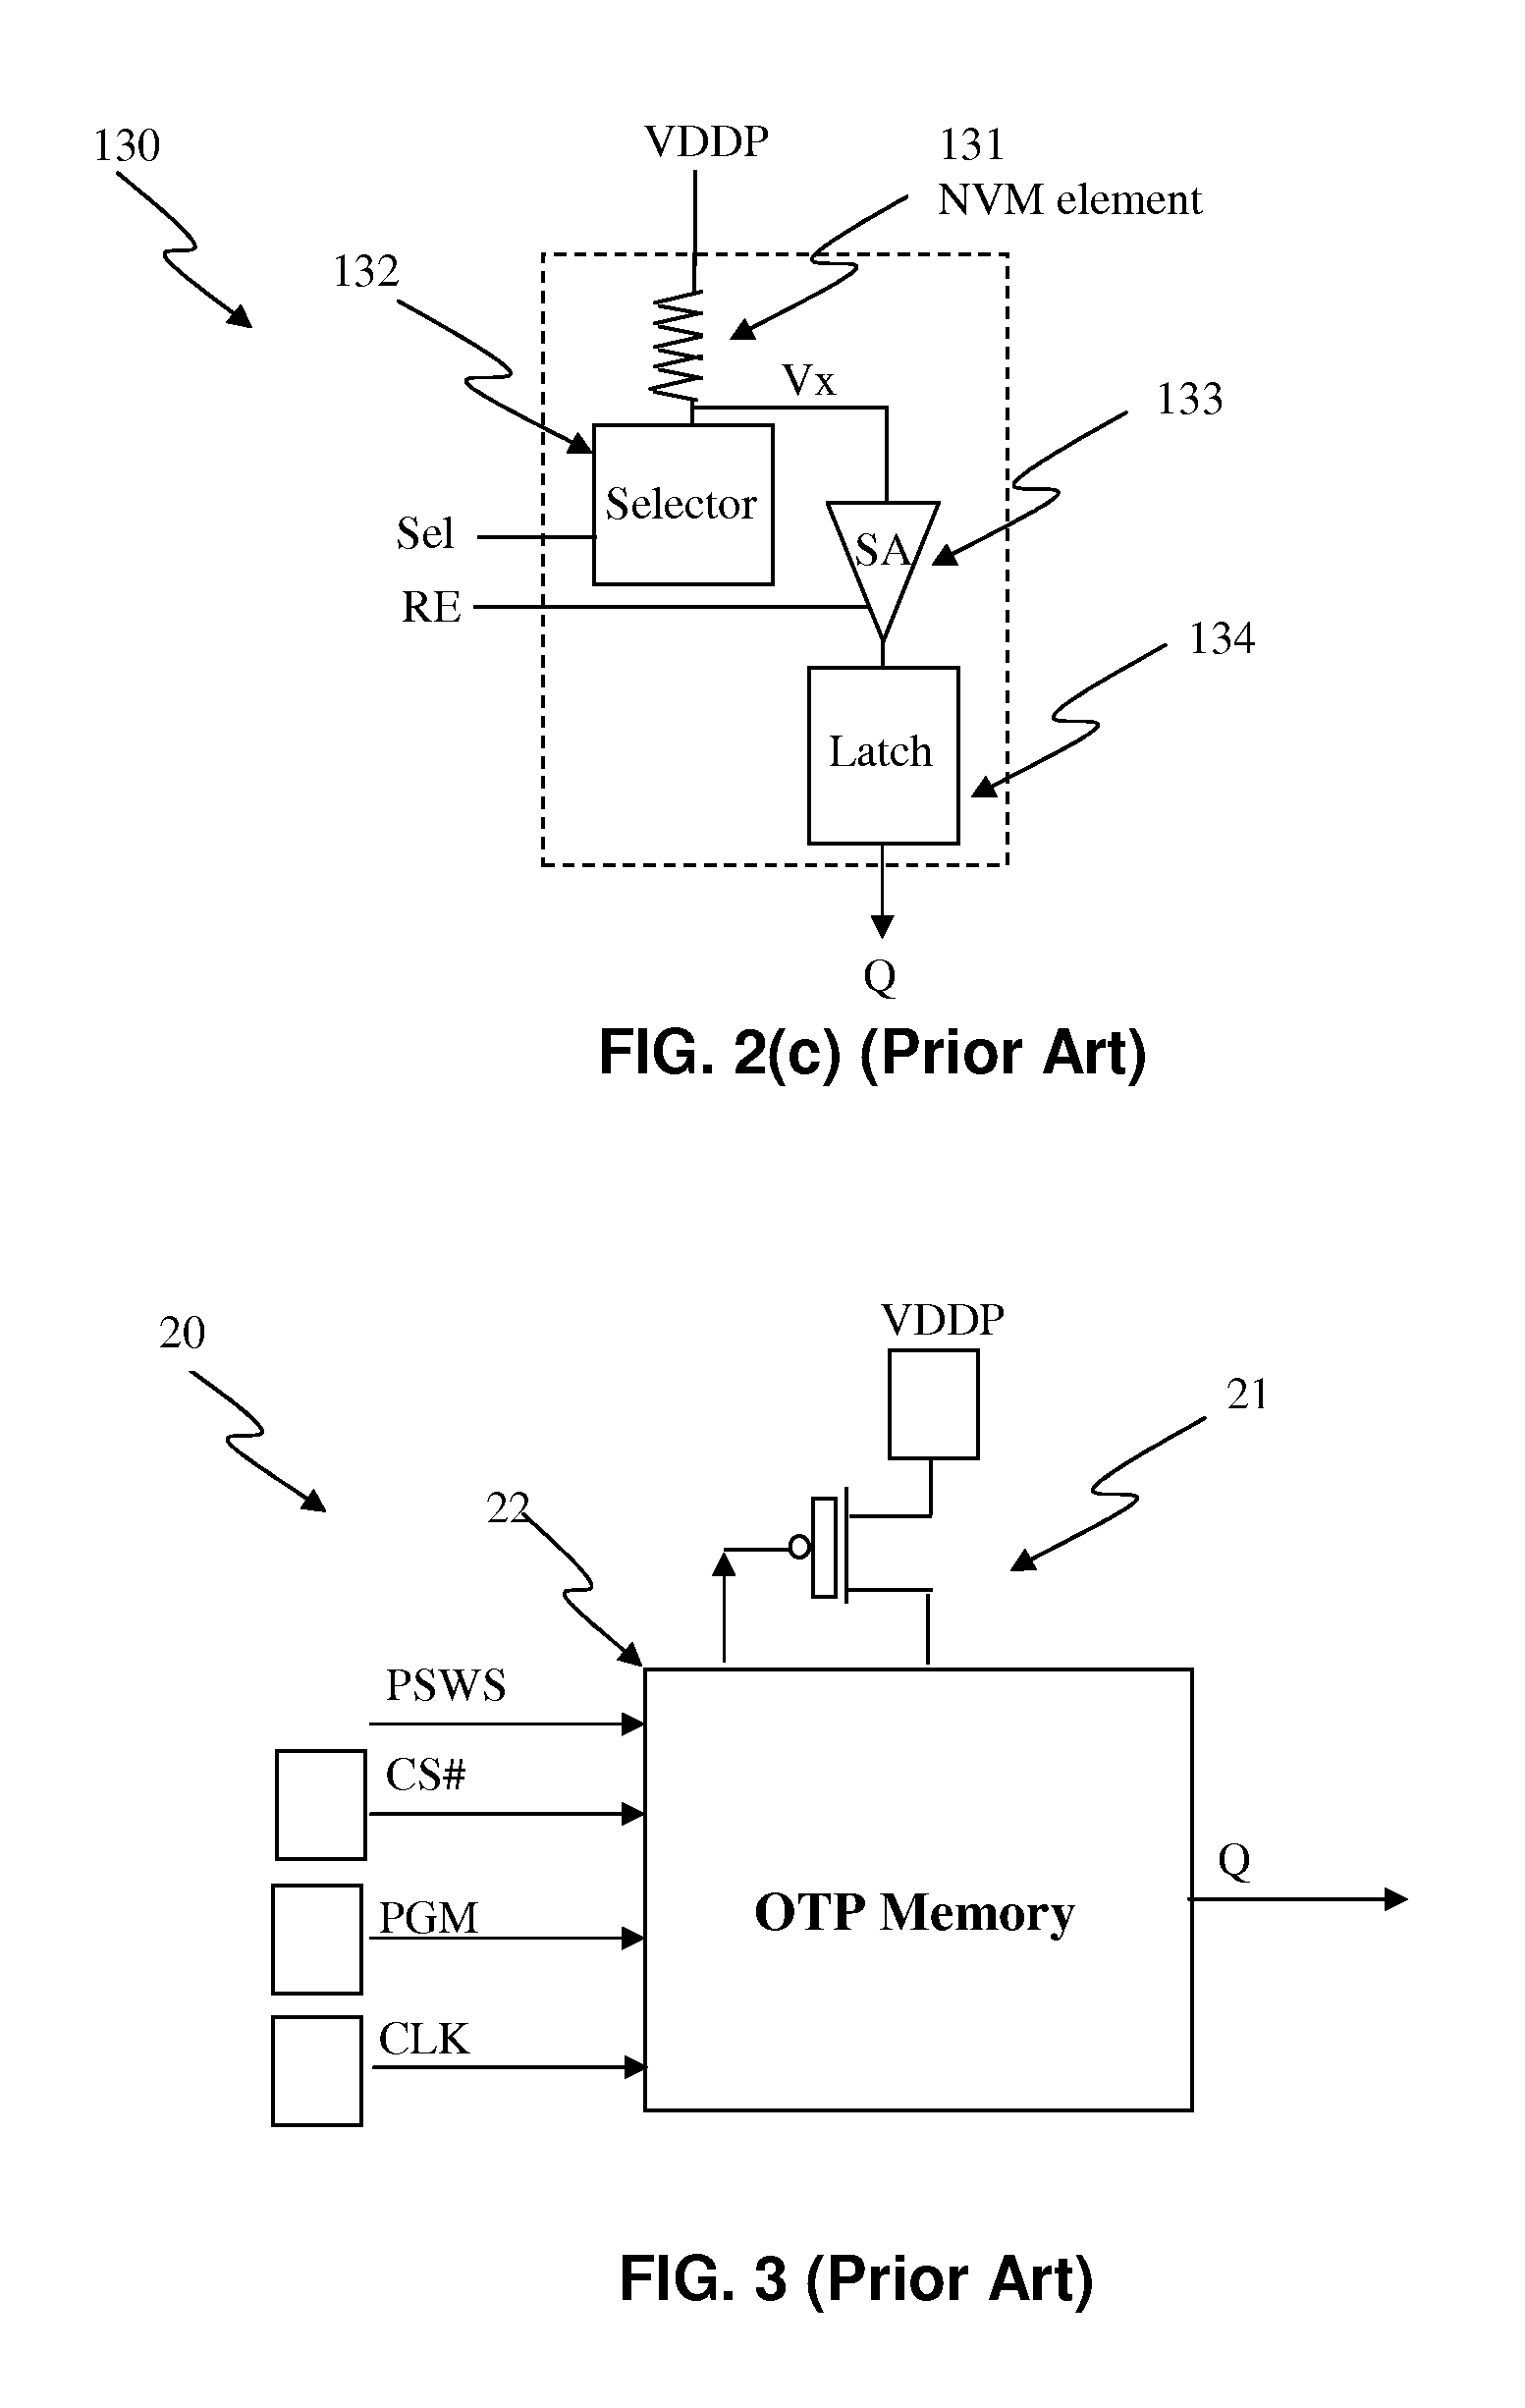 Low-Pin-Count Non-Volatile Memory Interface with Soft Programming Capability